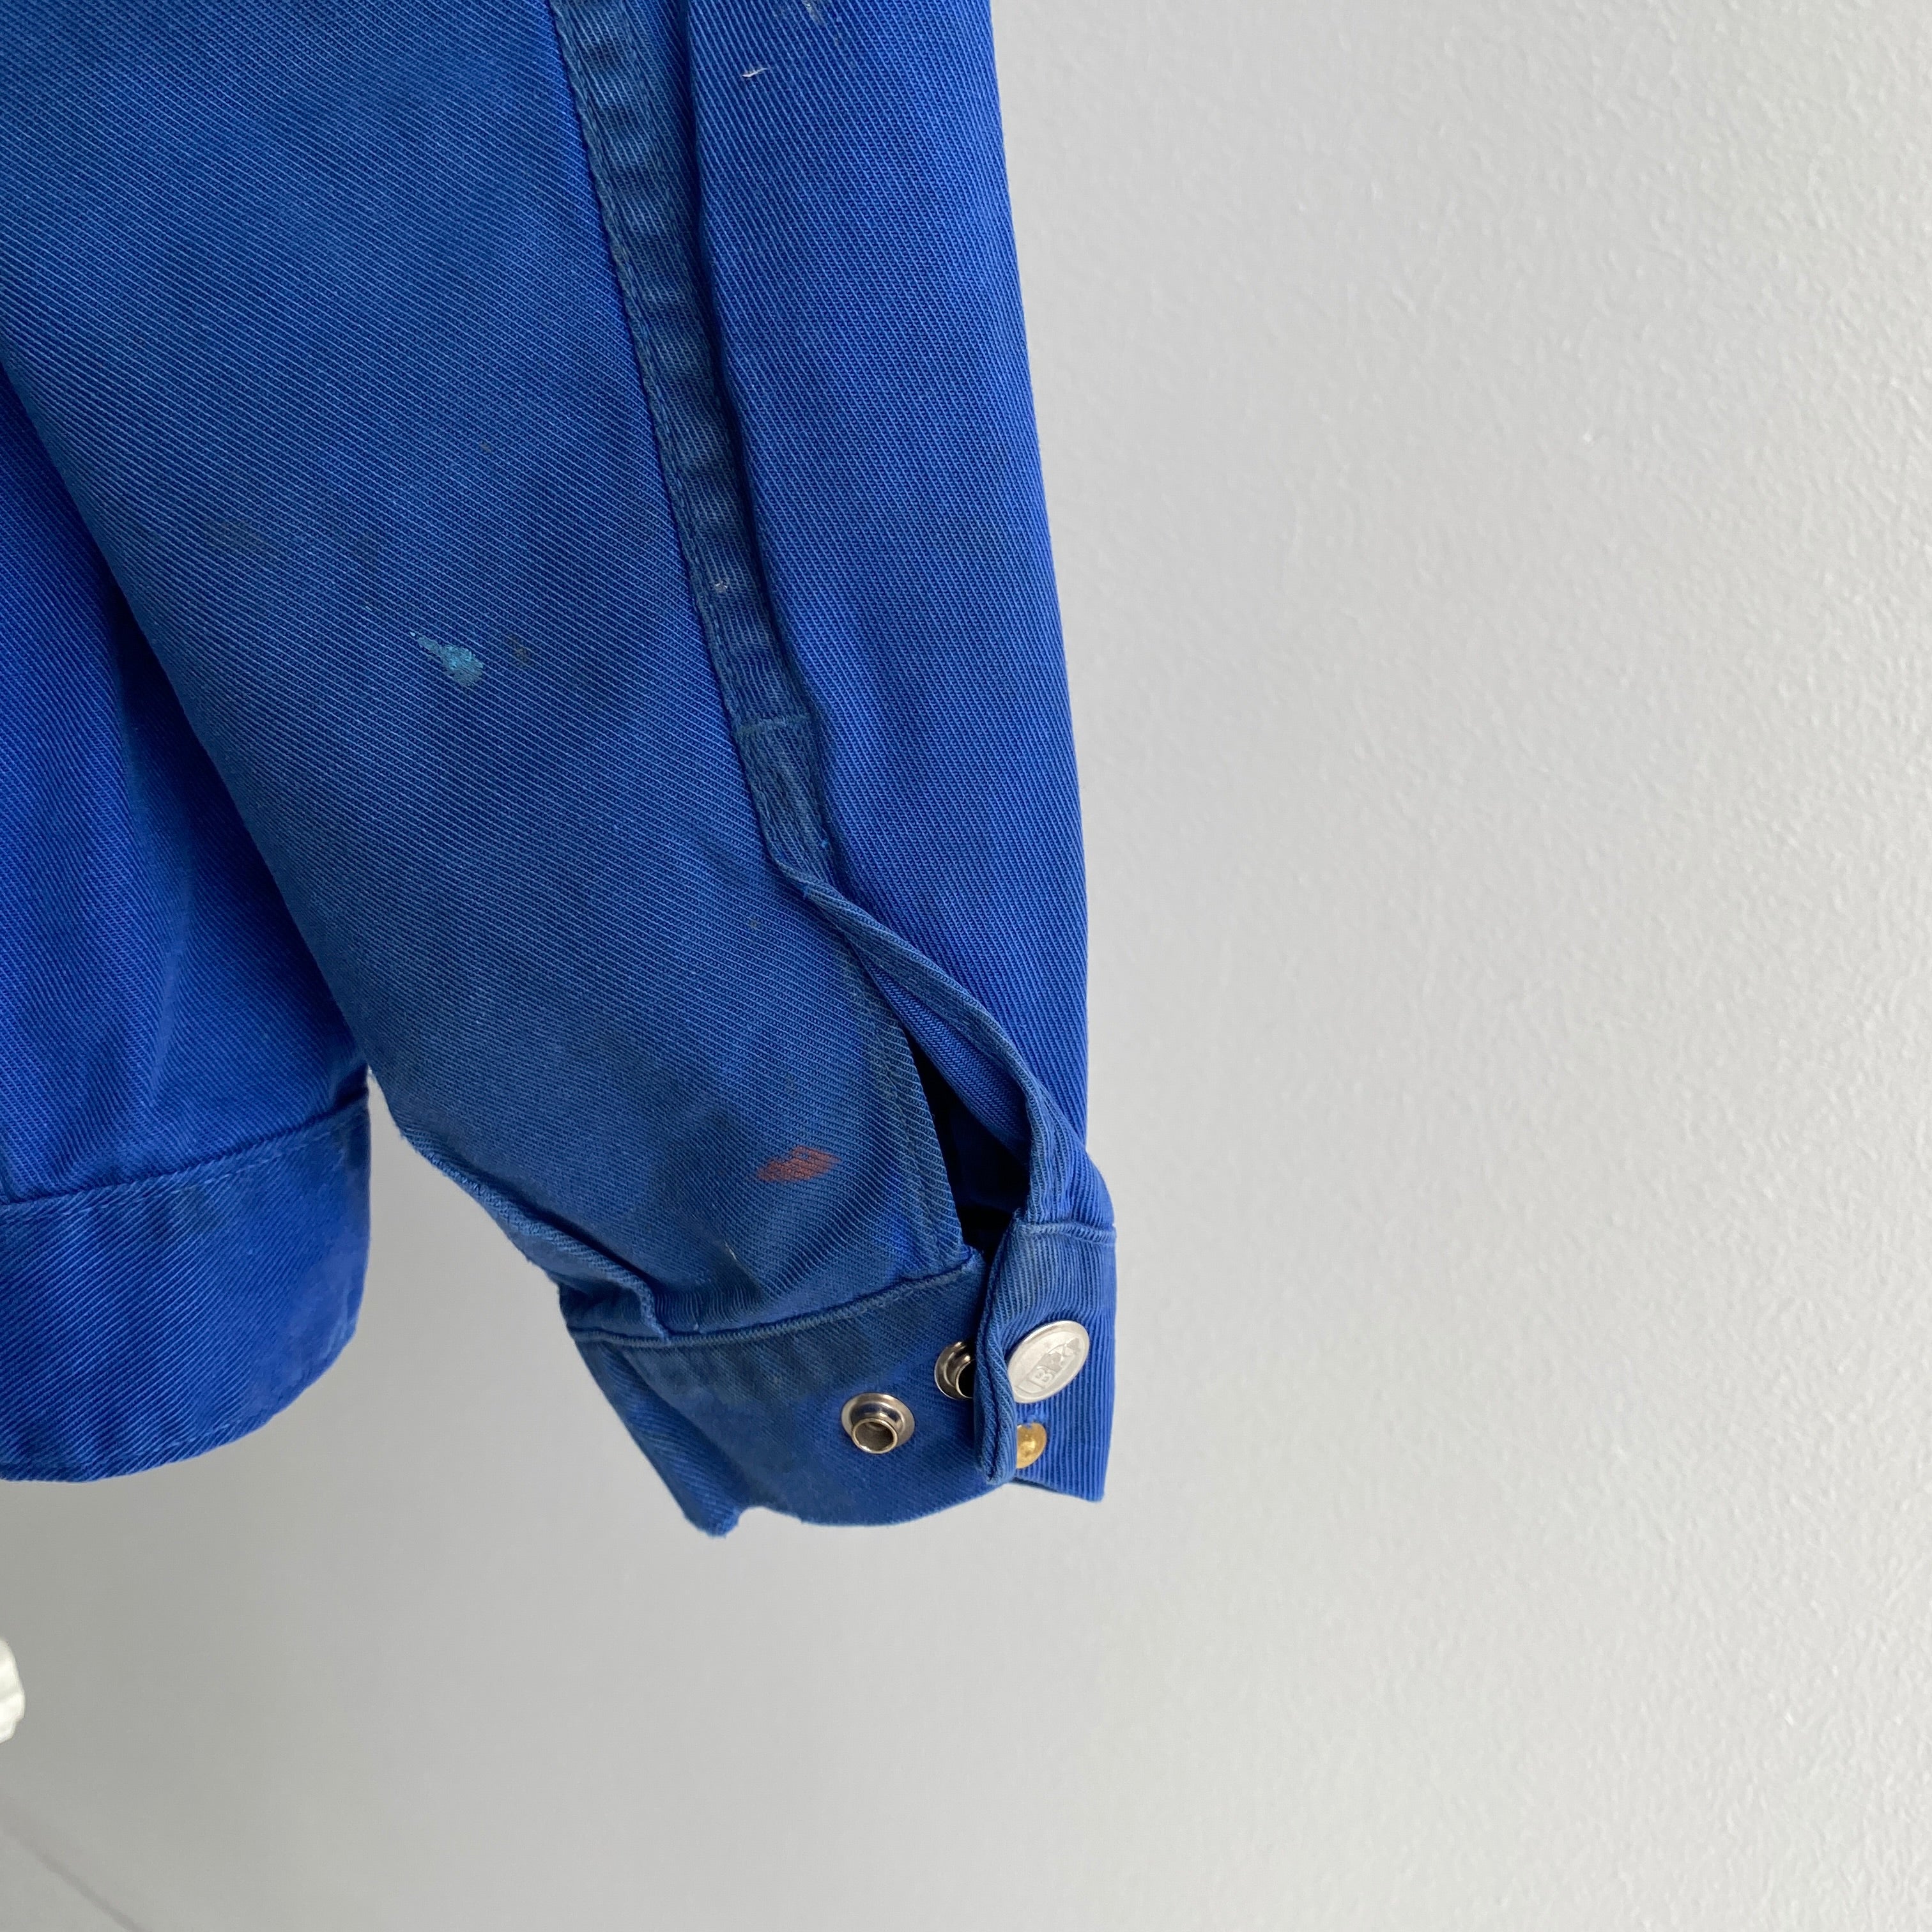 1990s BP European Workwear Jacket with Paint Staining and Snaps